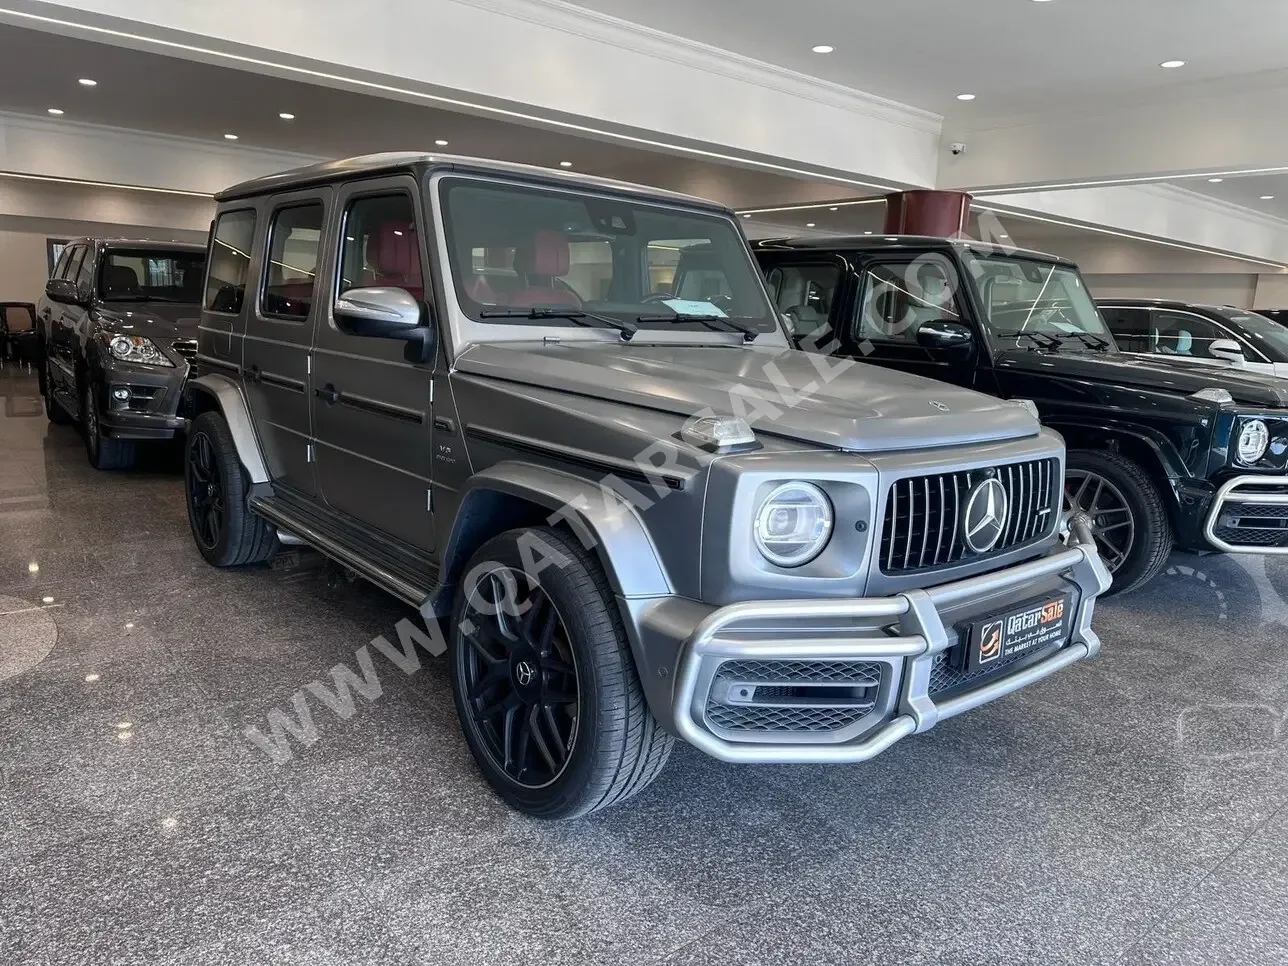 Mercedes-Benz  G-Class  63 AMG  2019  Automatic  80,000 Km  8 Cylinder  Four Wheel Drive (4WD)  SUV  Gray